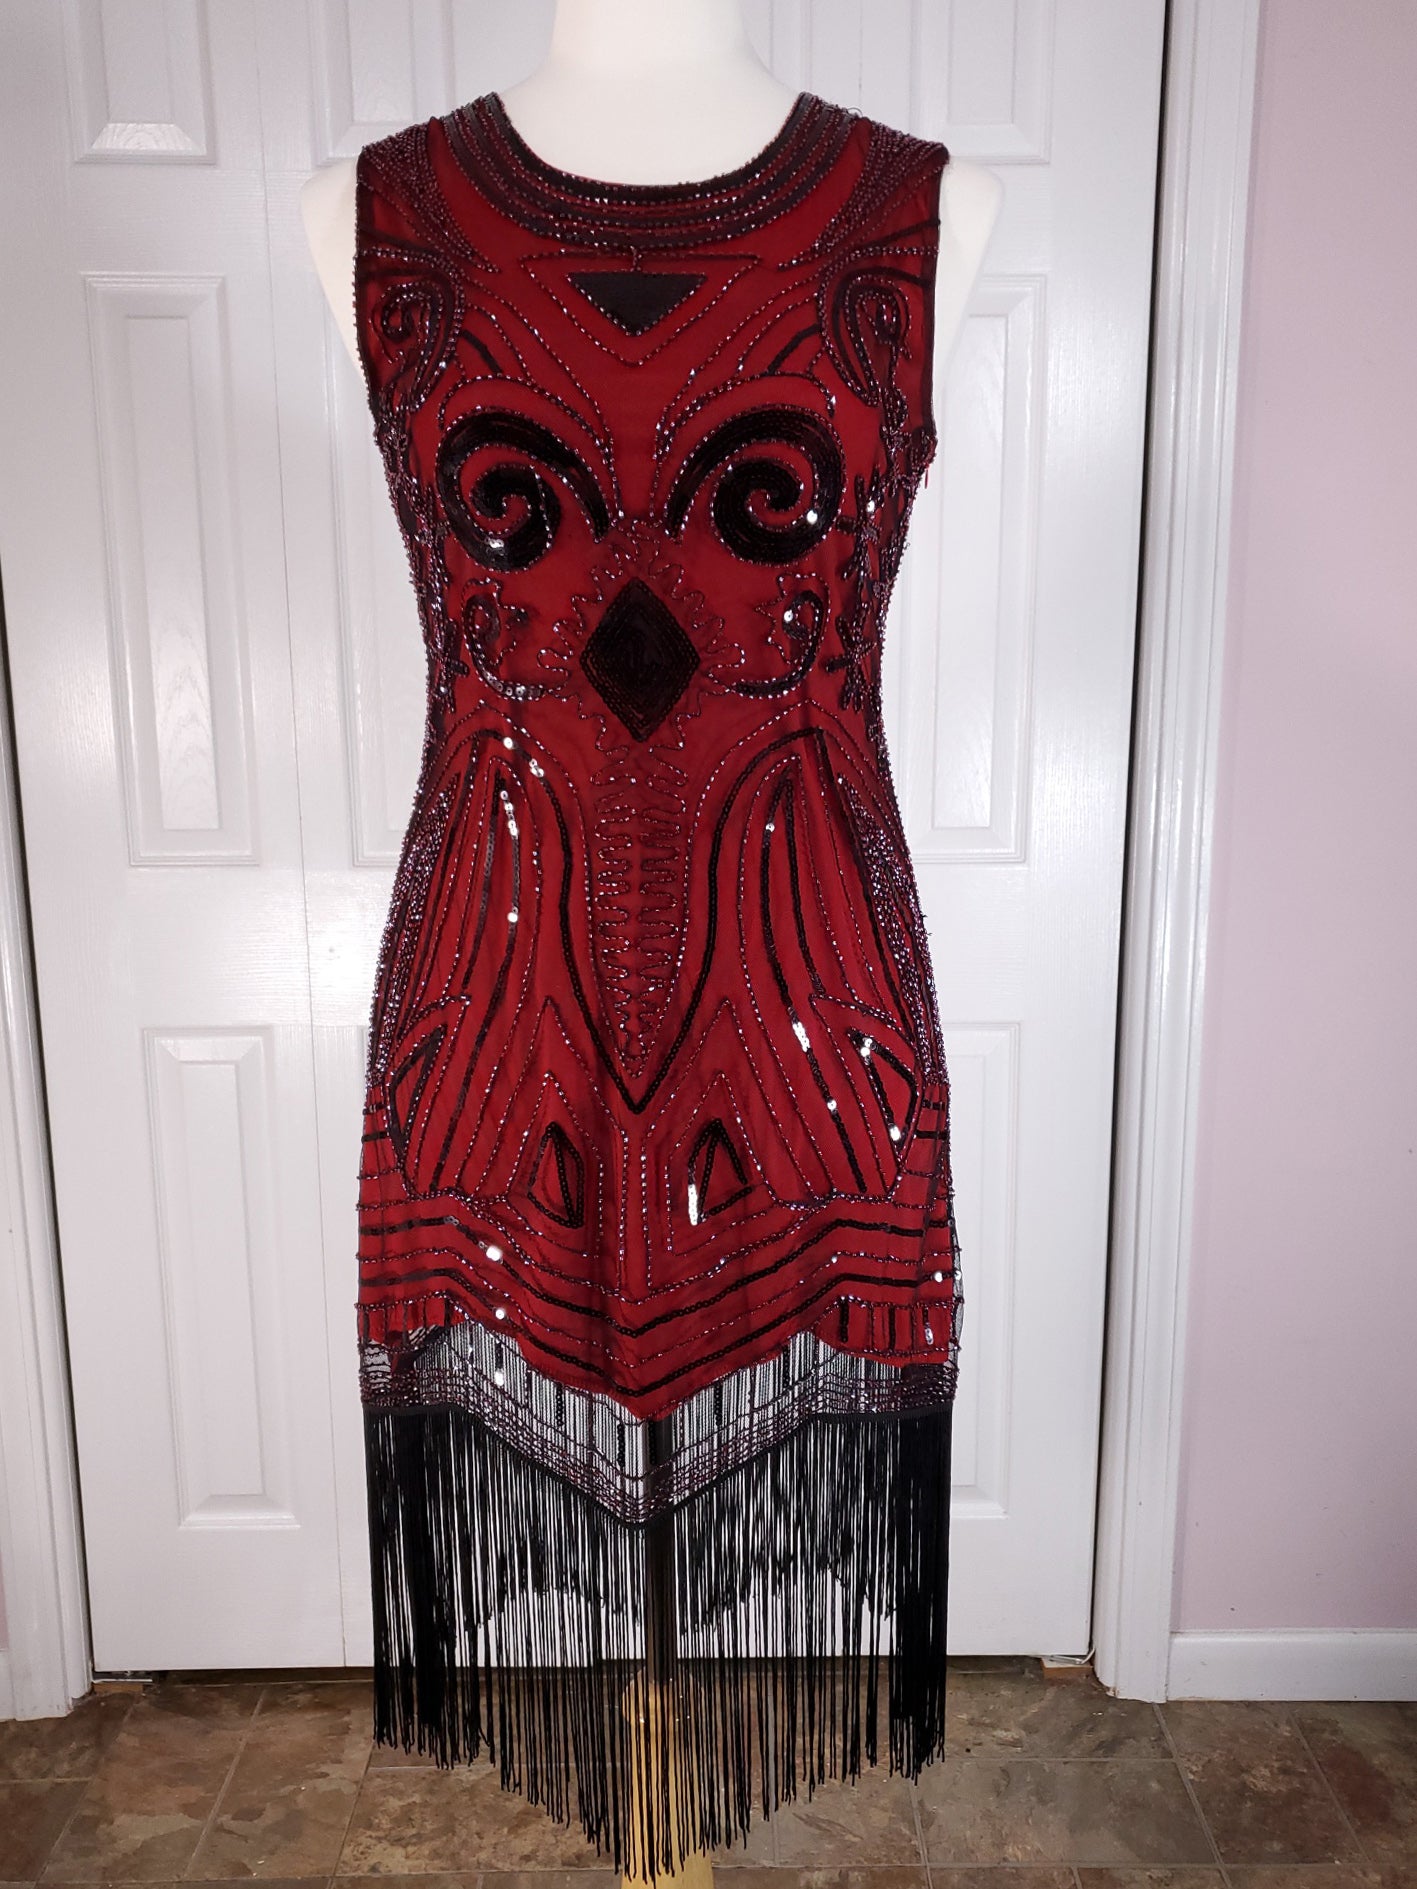 Buy IWIWB Flapper Dress 1920s Gatsby V Neck Beaded Fringed Dress with 20's  Accessories (Large, Black&Red) at Amazon.in